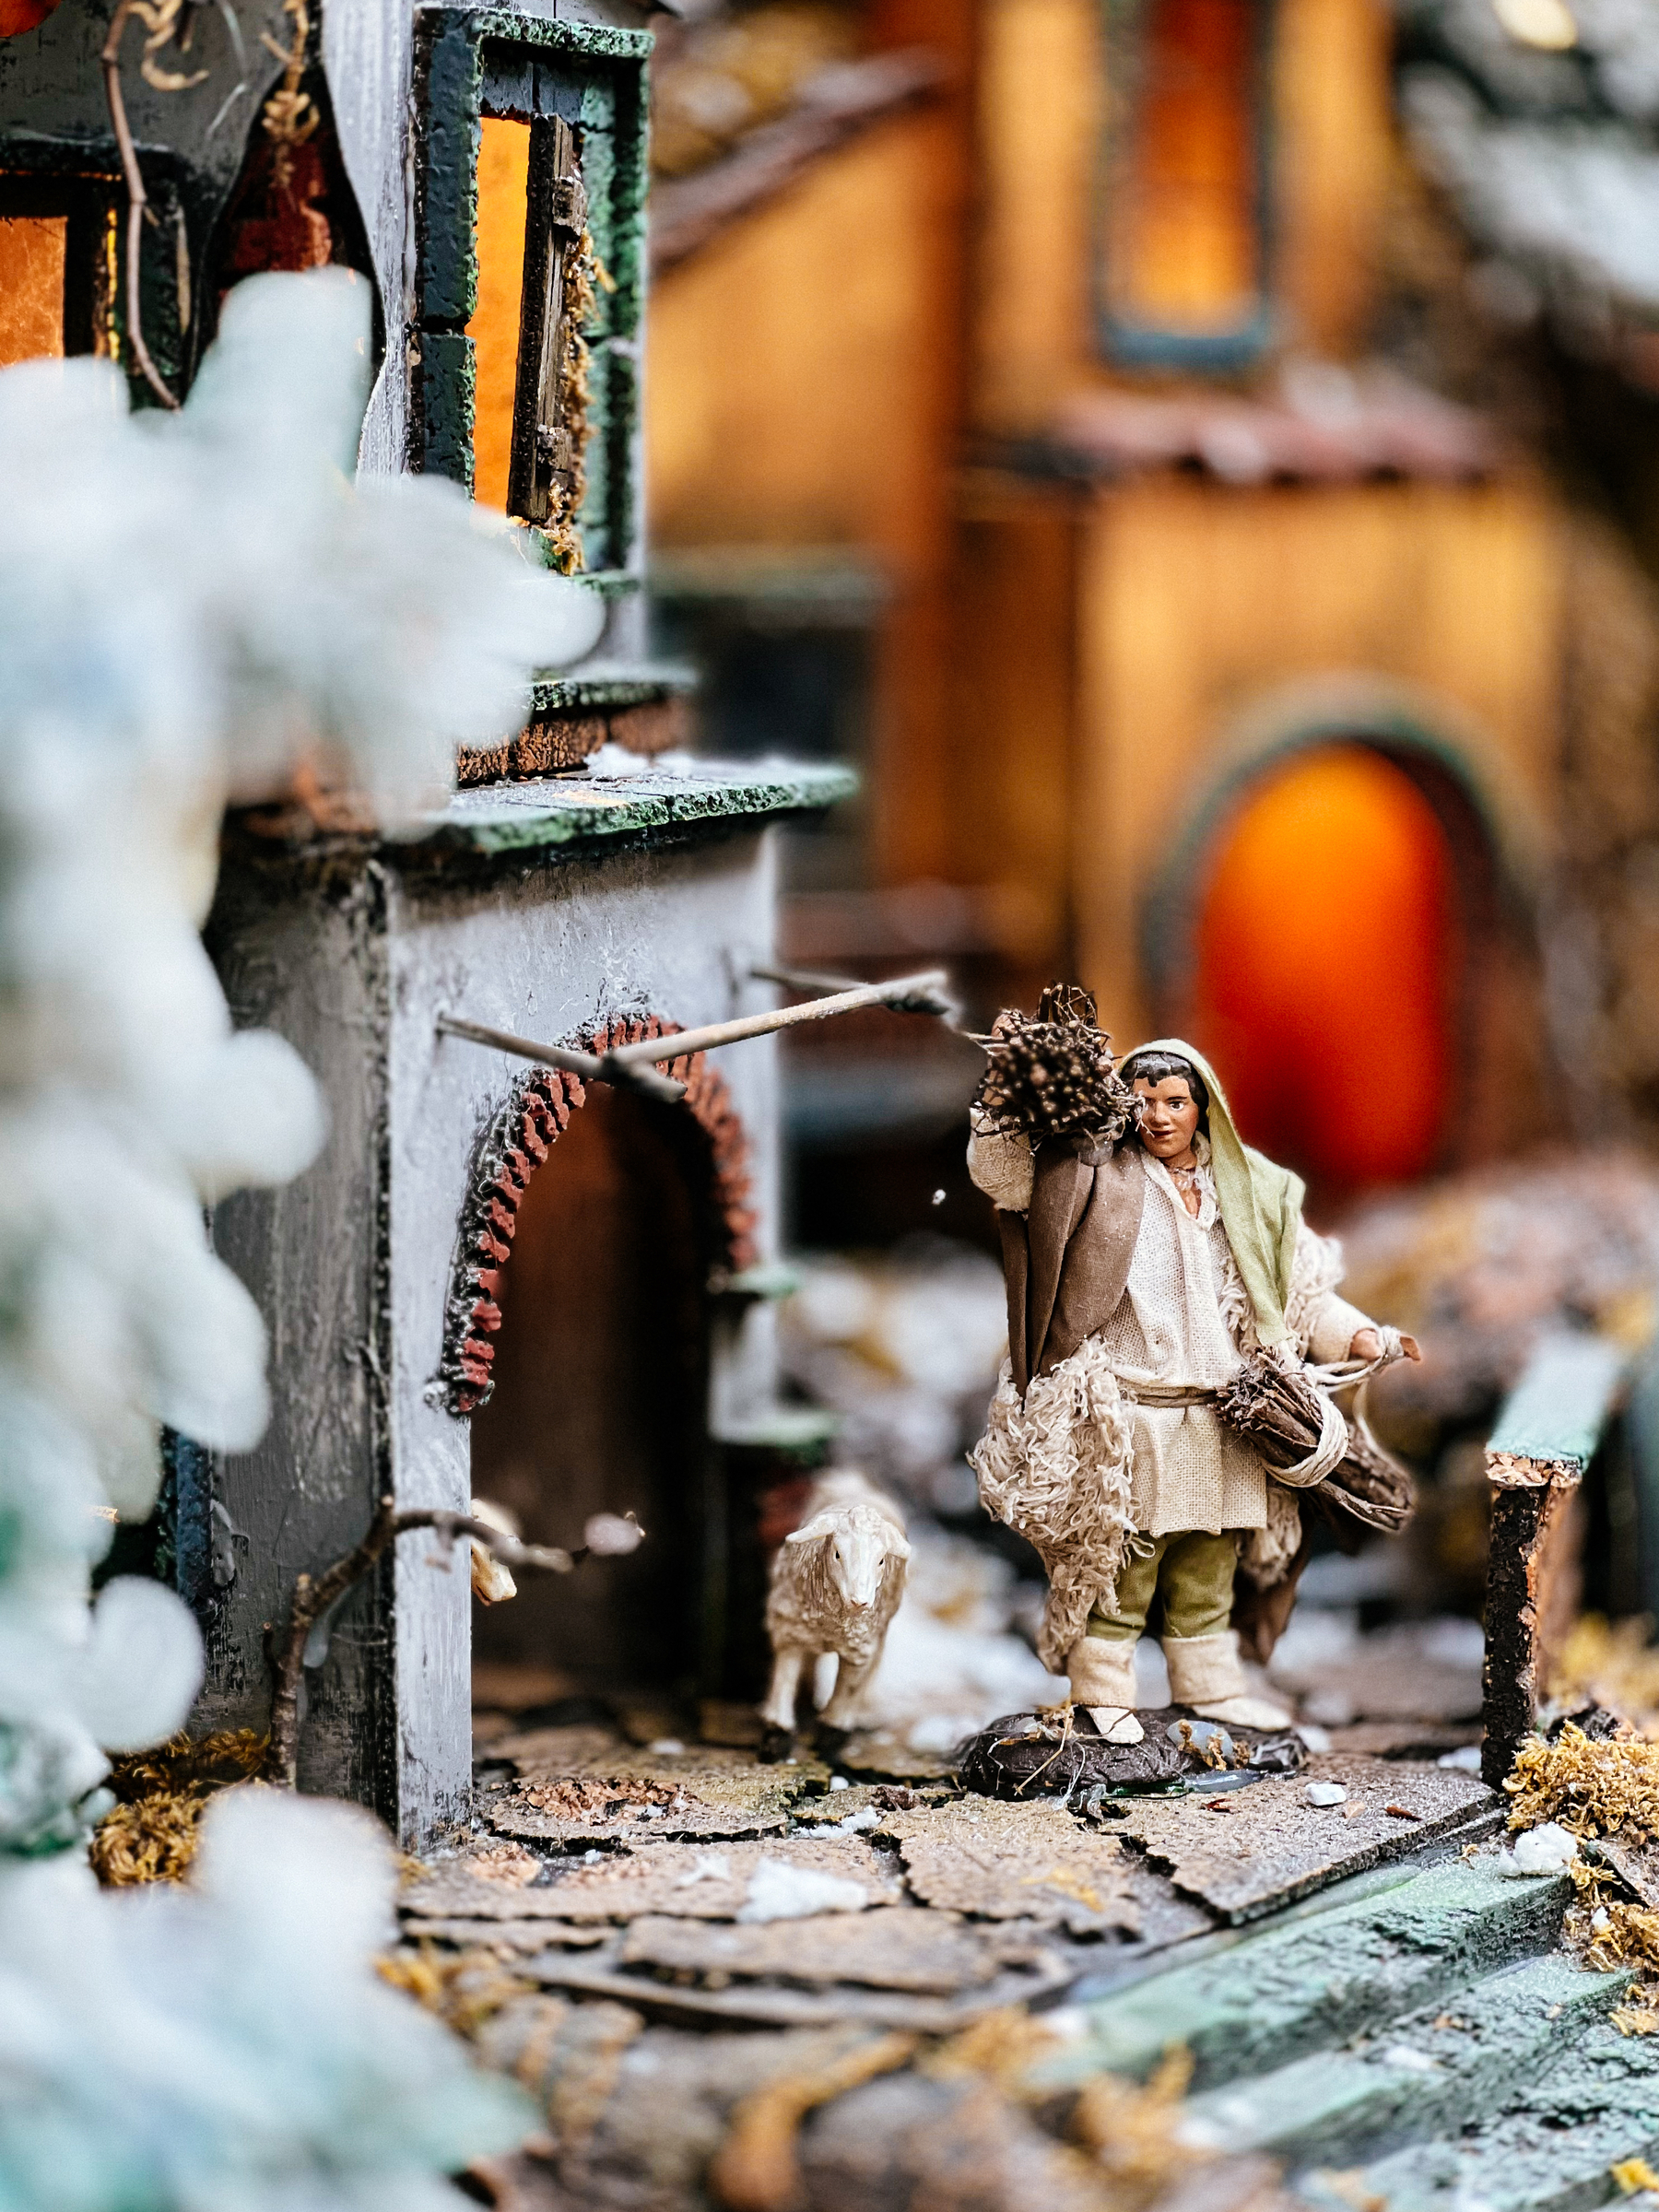 A character in a nativity scene. A man with sheep. 